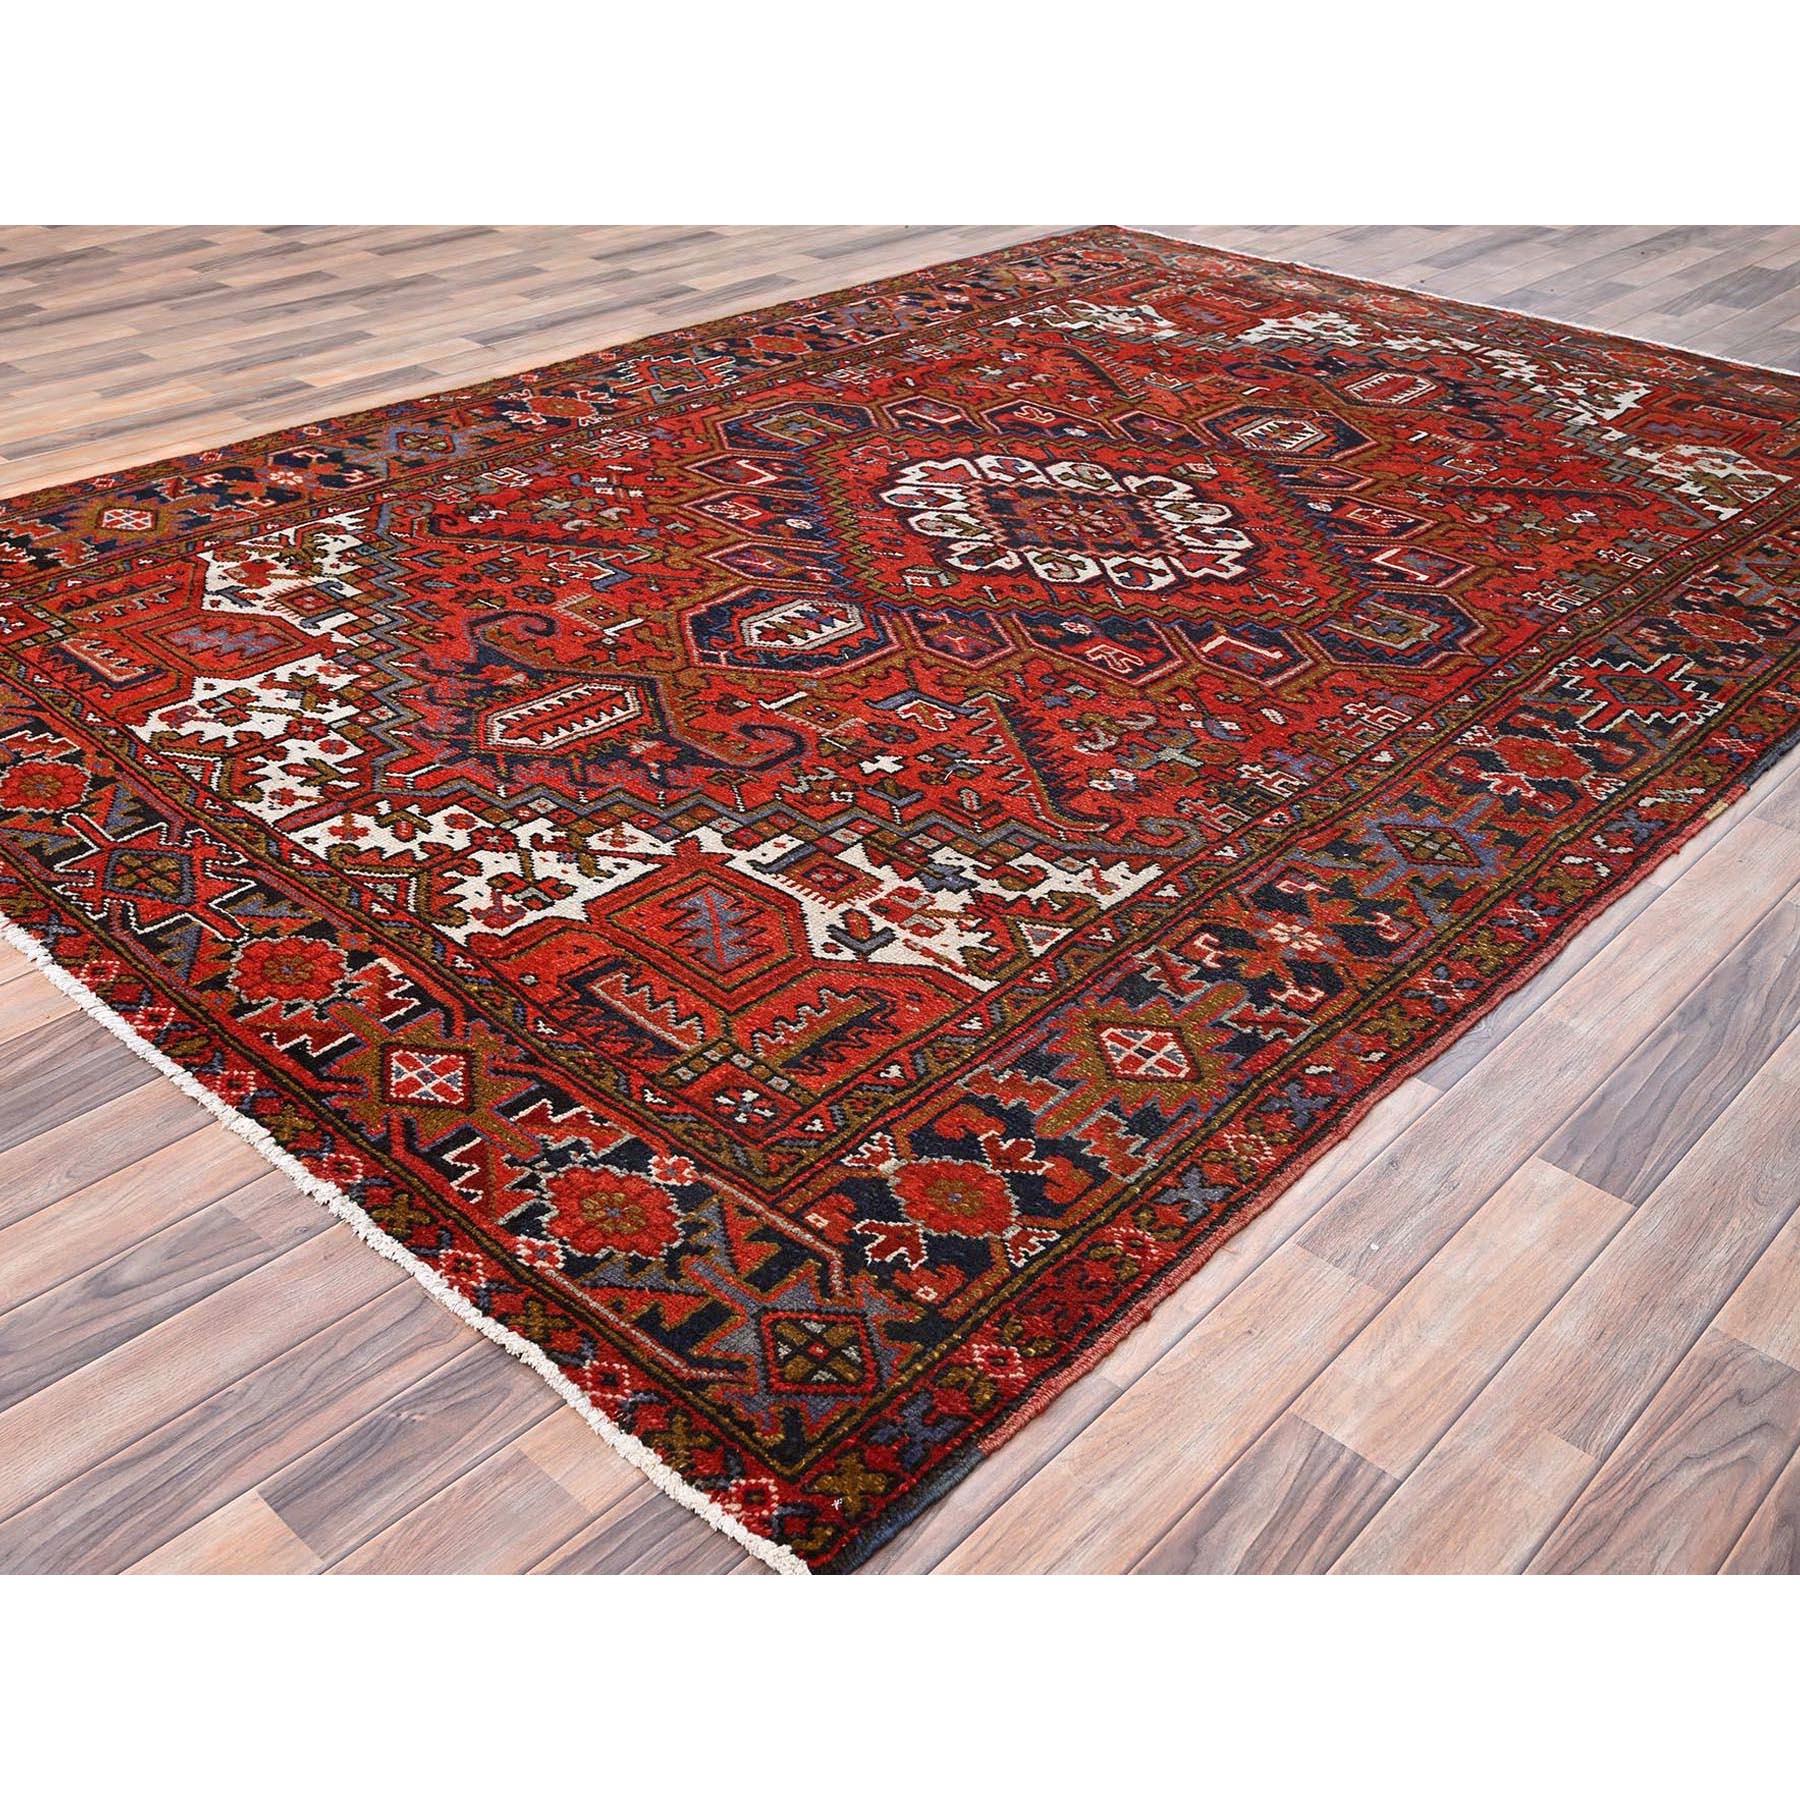 Raspberry Red Worn Wool Hand Knotted Semi Antique Persian Heriz Rustic Feel Rug In Good Condition For Sale In Carlstadt, NJ